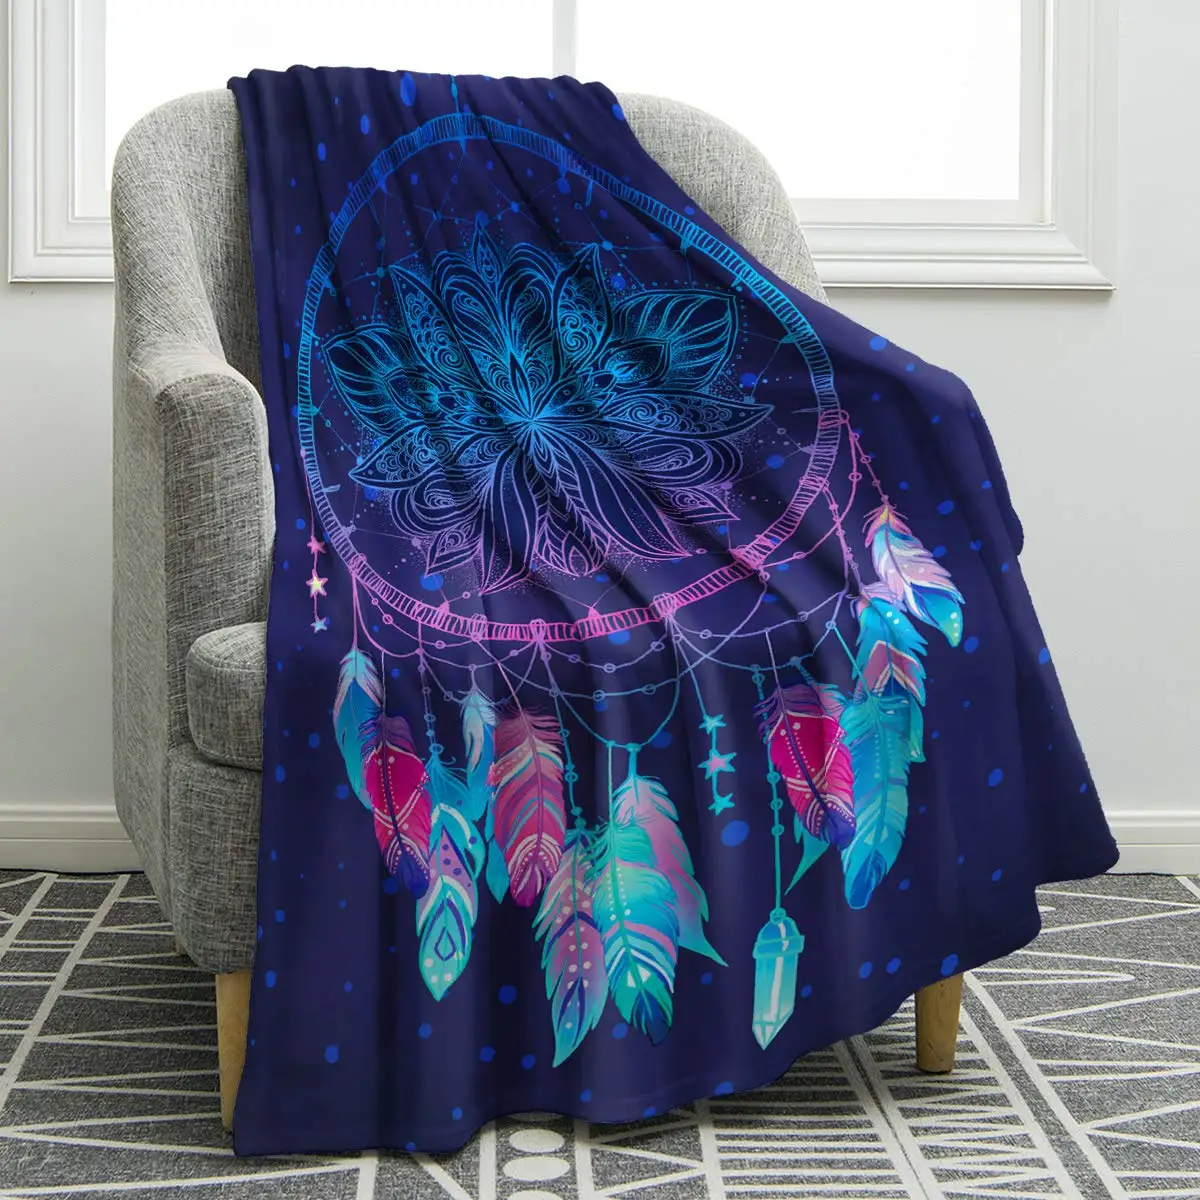 

Feathers Butterfly Dream Catcher Flannel Throw Blanket Lightweight Leaves Decorative Gifts for Couch Sofa Travelling Kids Adults